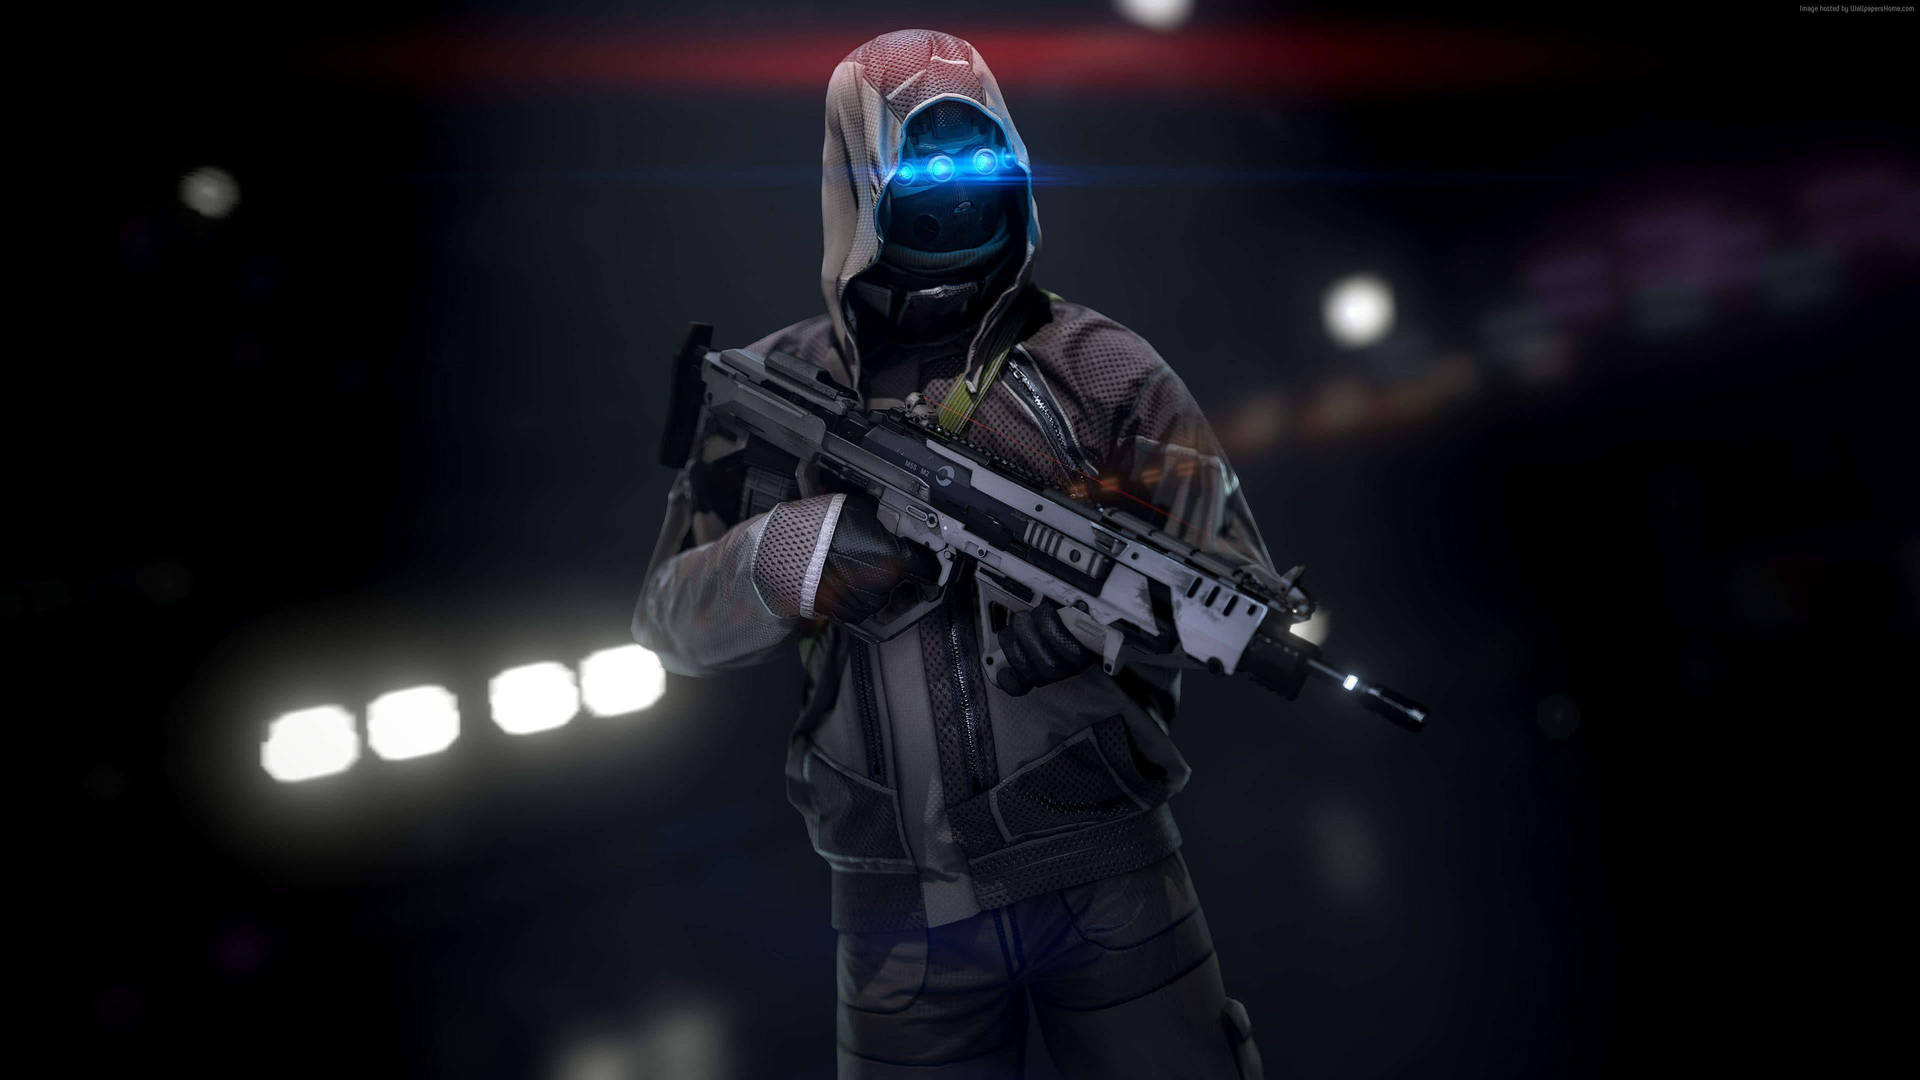 Pubg Hd Hooded Character With Blue Lights Wallpaper